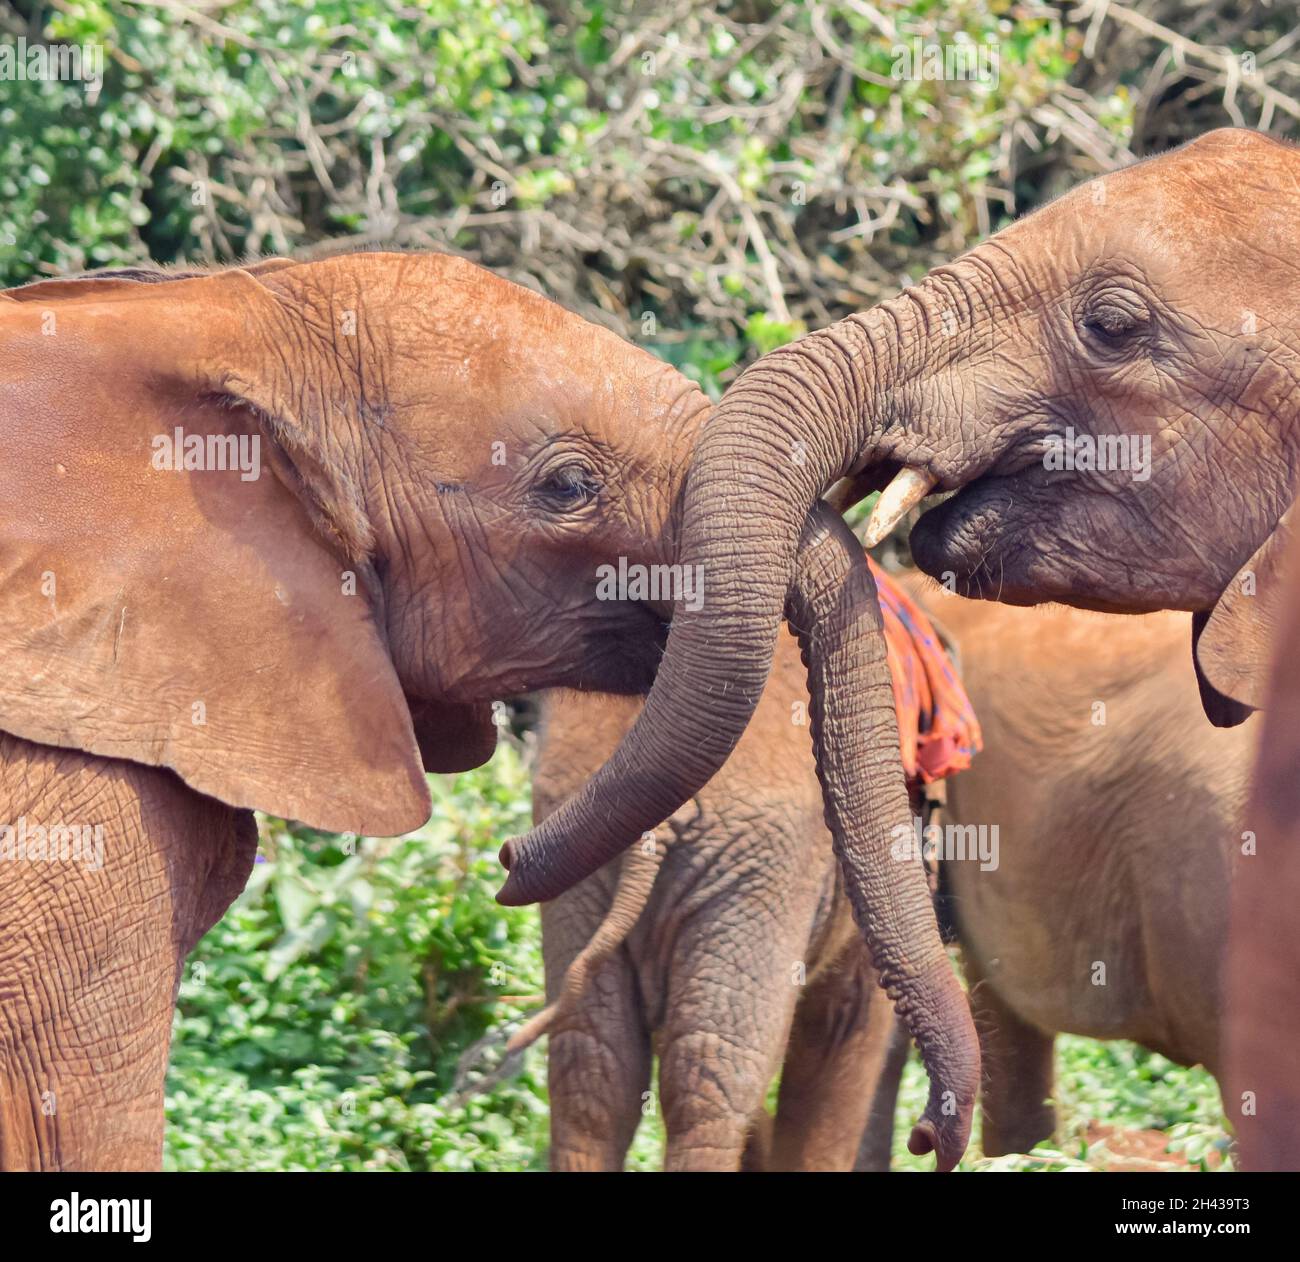 Closeup of baby elephants (Loxodonta africana) touching trunks in a display of affection at the Elephant Orphanage in Nairobi National Park, Kenya. Stock Photo